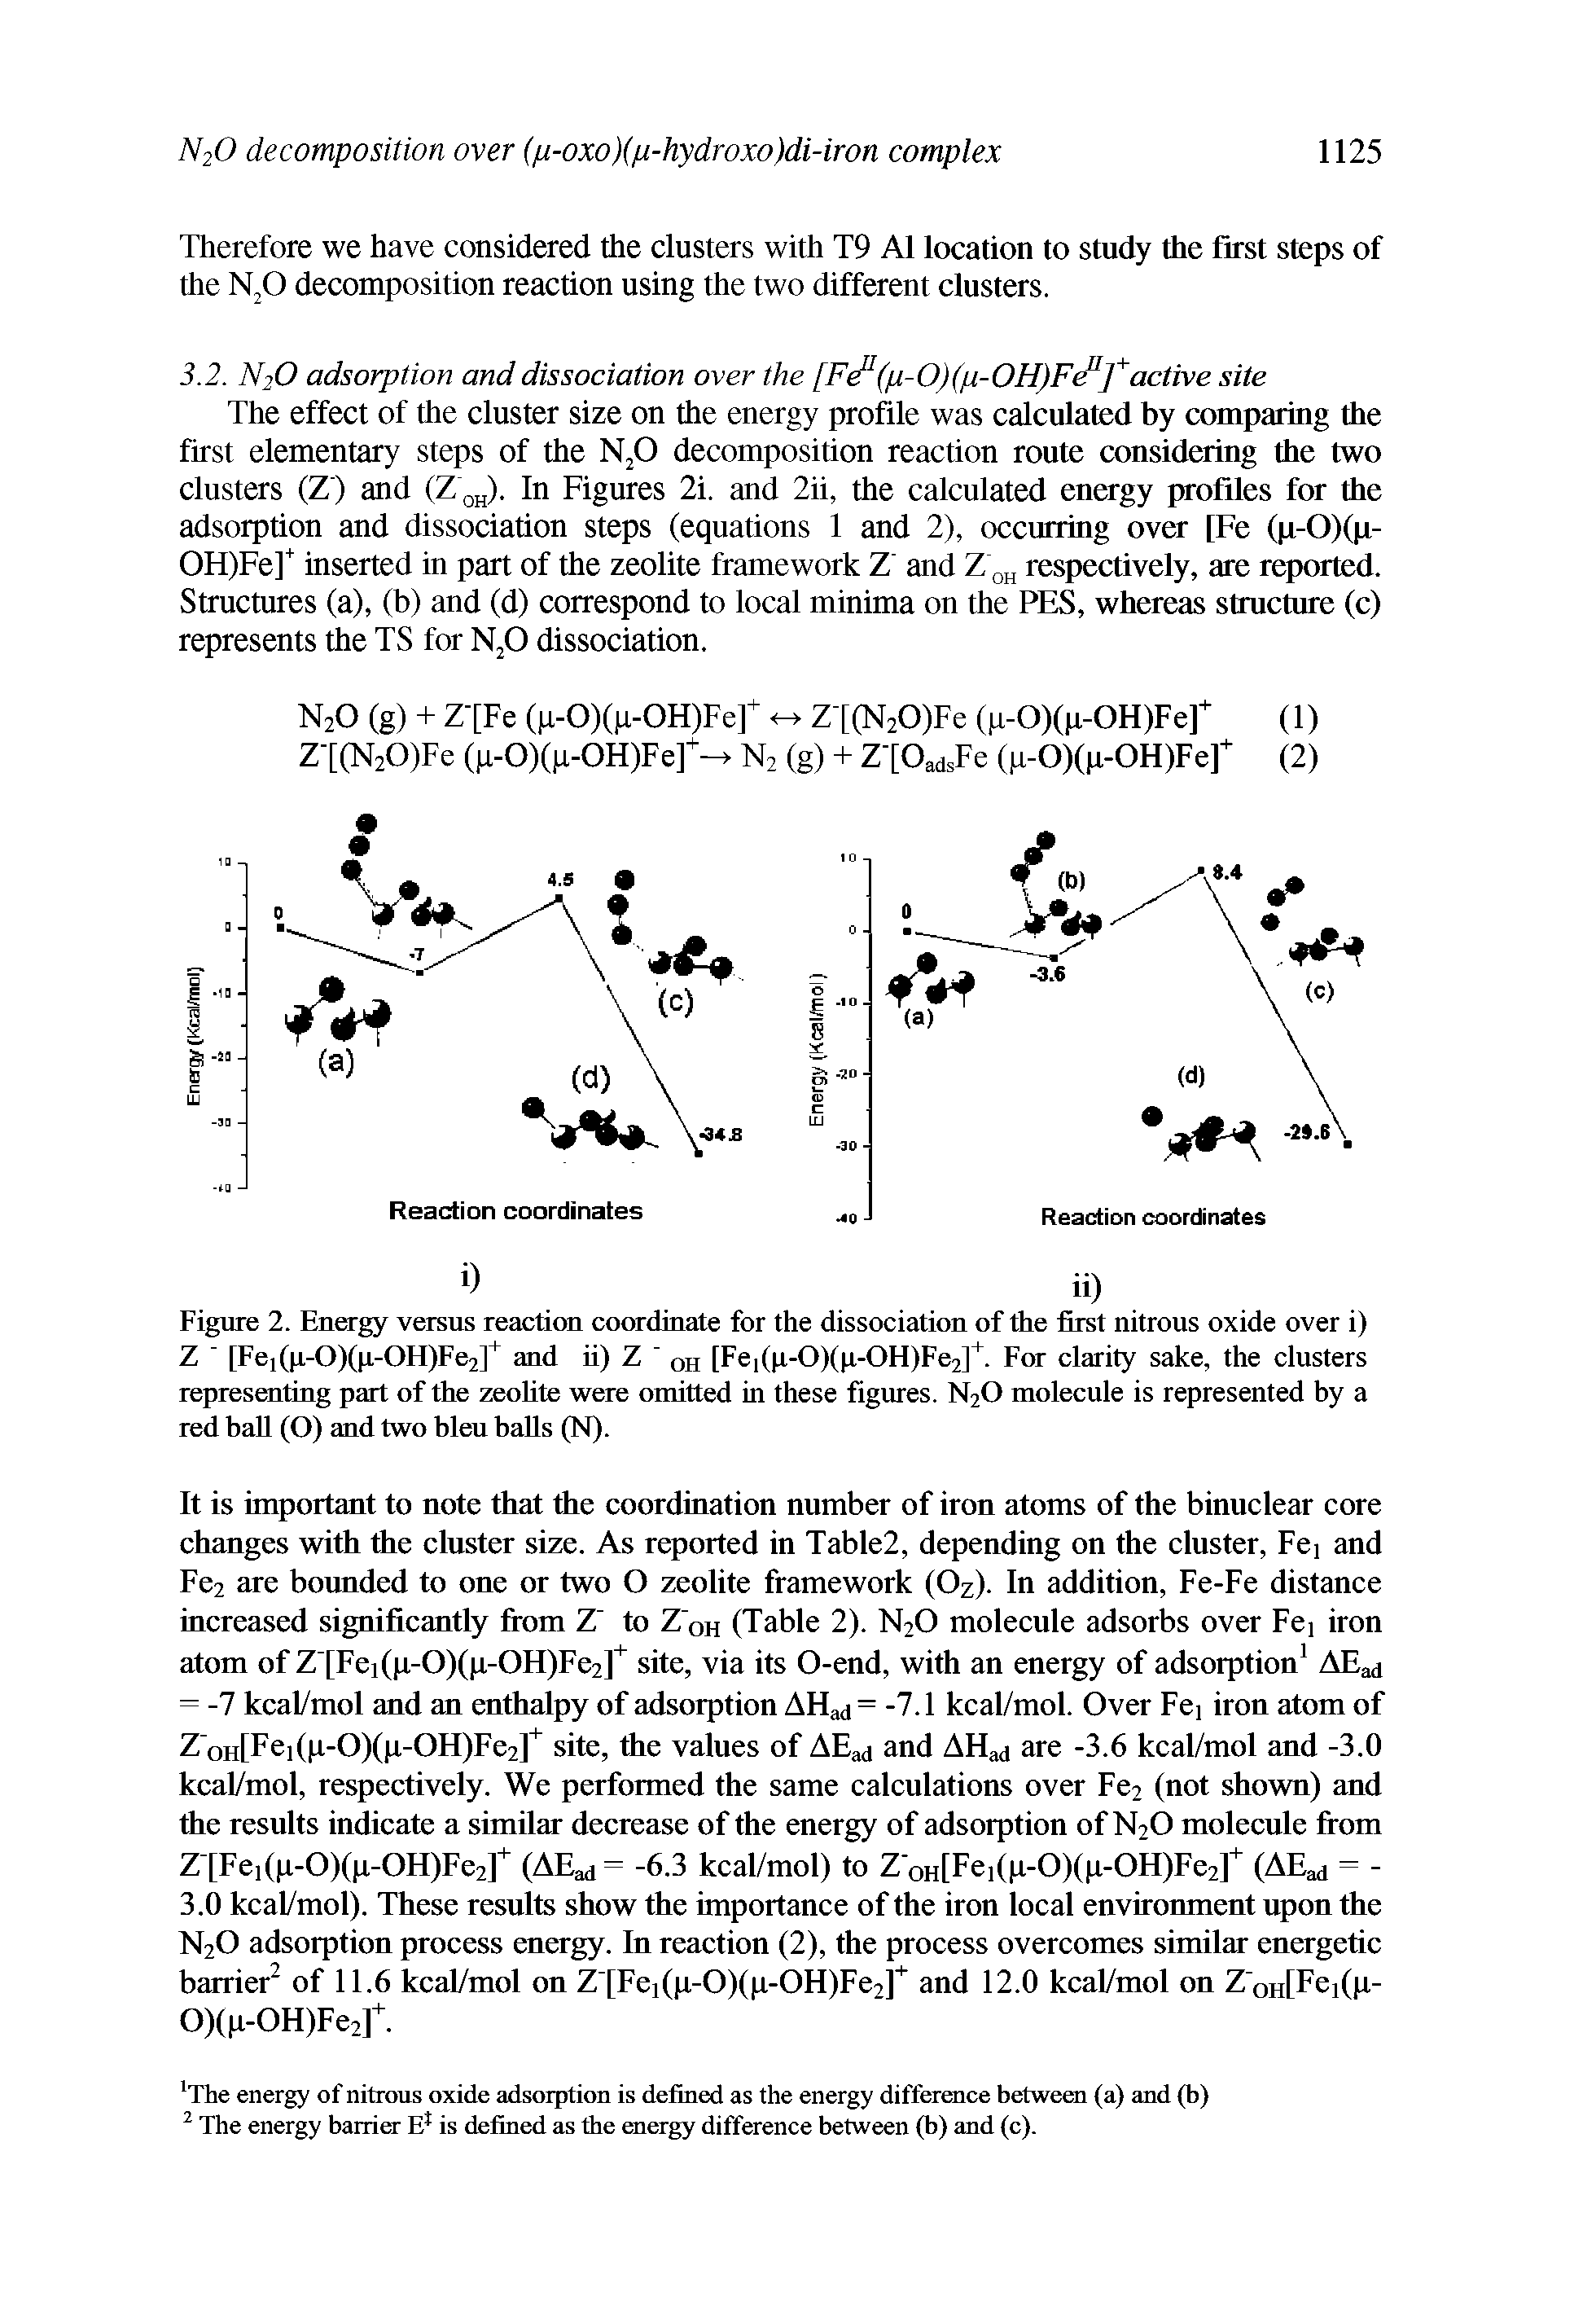 Figure 2. Energy versus reaction coordinate for the dissociation of the first nitrous oxide over i) Z " Fe, (p-t))(p-OI I)Fe211 and ii) Z " Qh [Fe1( t-0)( t-0H)Fe2]+. For clarity sake, the clusters representing part of the zeolite were omitted in these figures. N20 molecule is represented by a red ball (O) and two bleu balls (N).